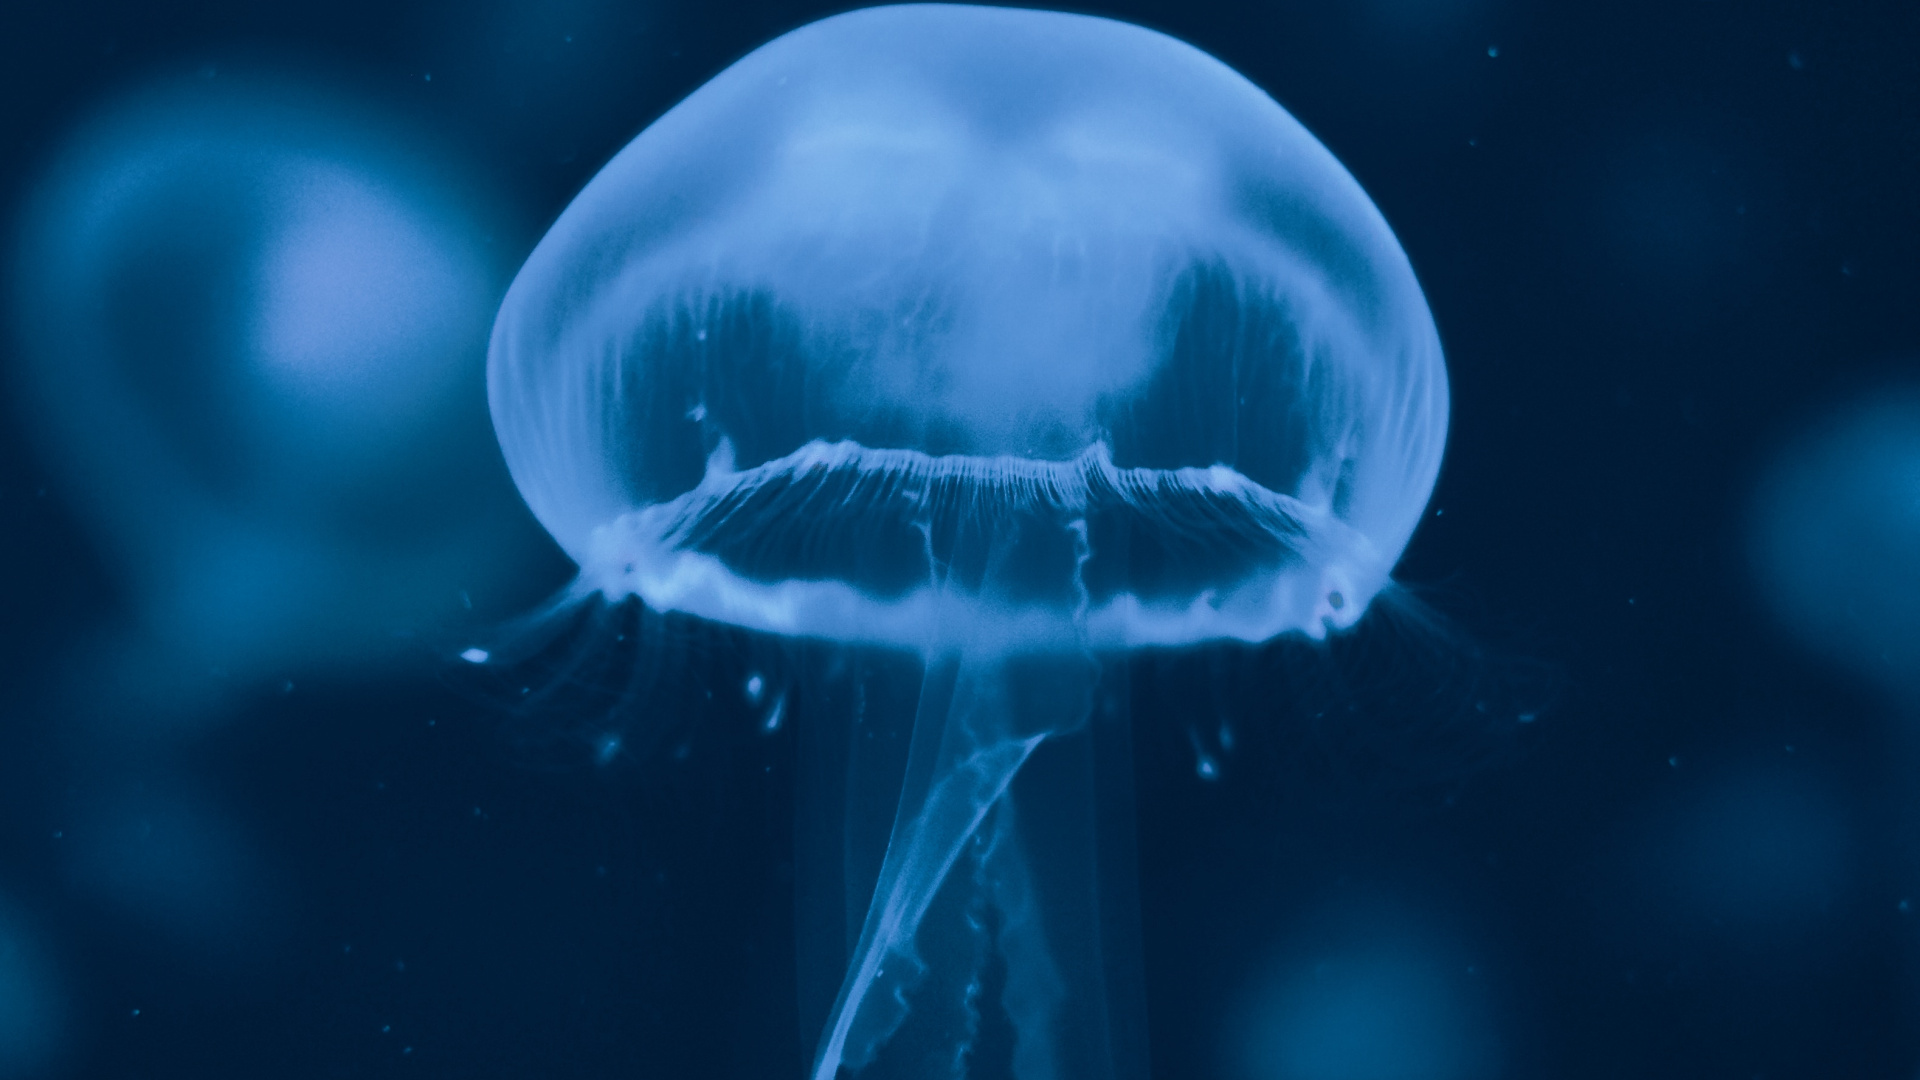 Blue and White Jellyfish Illustration. Wallpaper in 1920x1080 Resolution